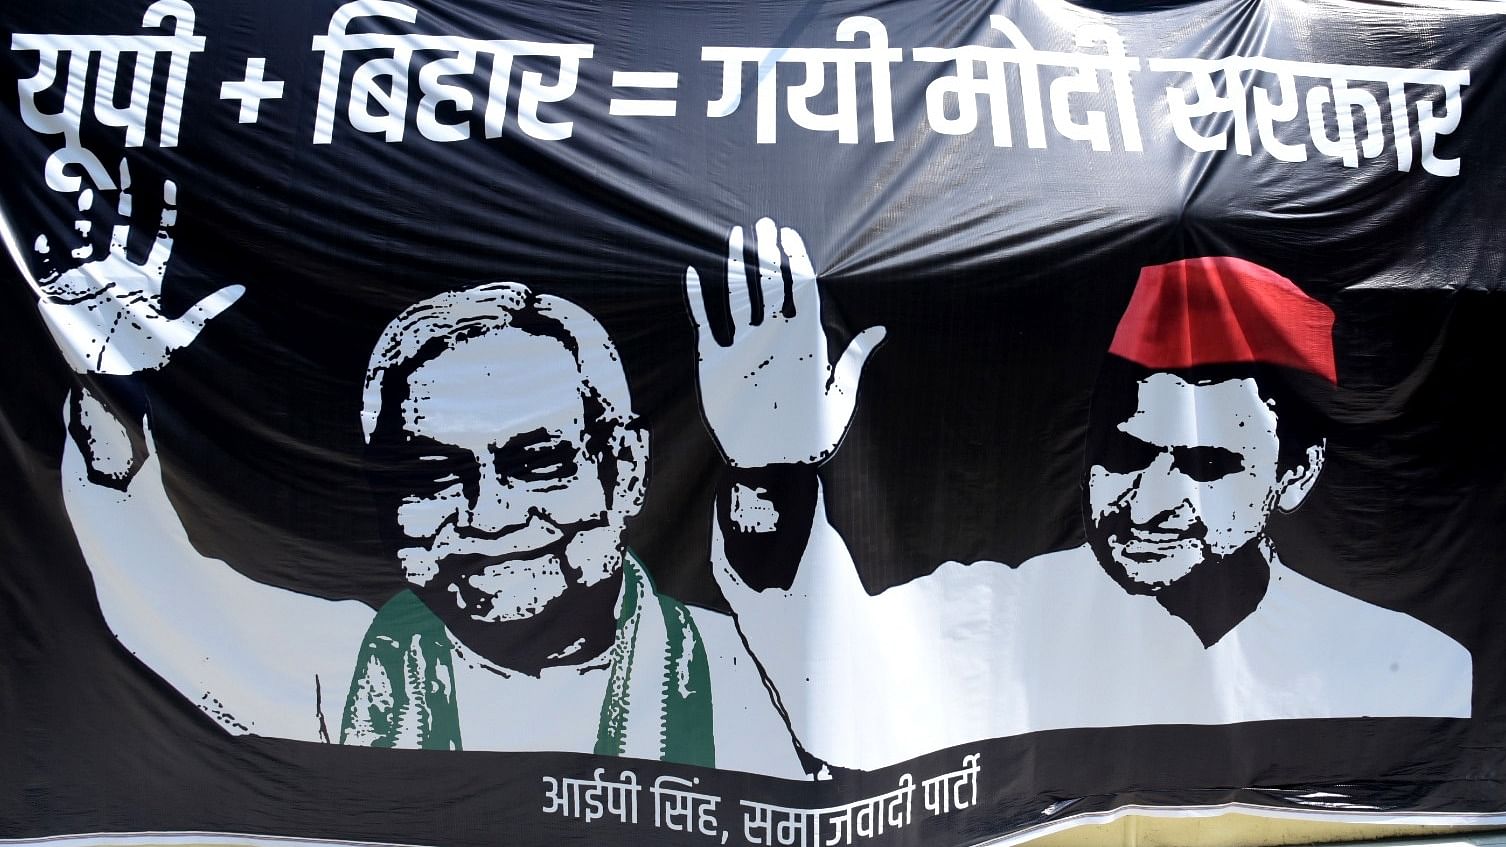 Samajwadi Party leader IP Singh, the man behind the banner, said Saturday Uttar Pradesh and Bihar have the history of initiating events that change the course of the country's politics. Credit: IANS Photo